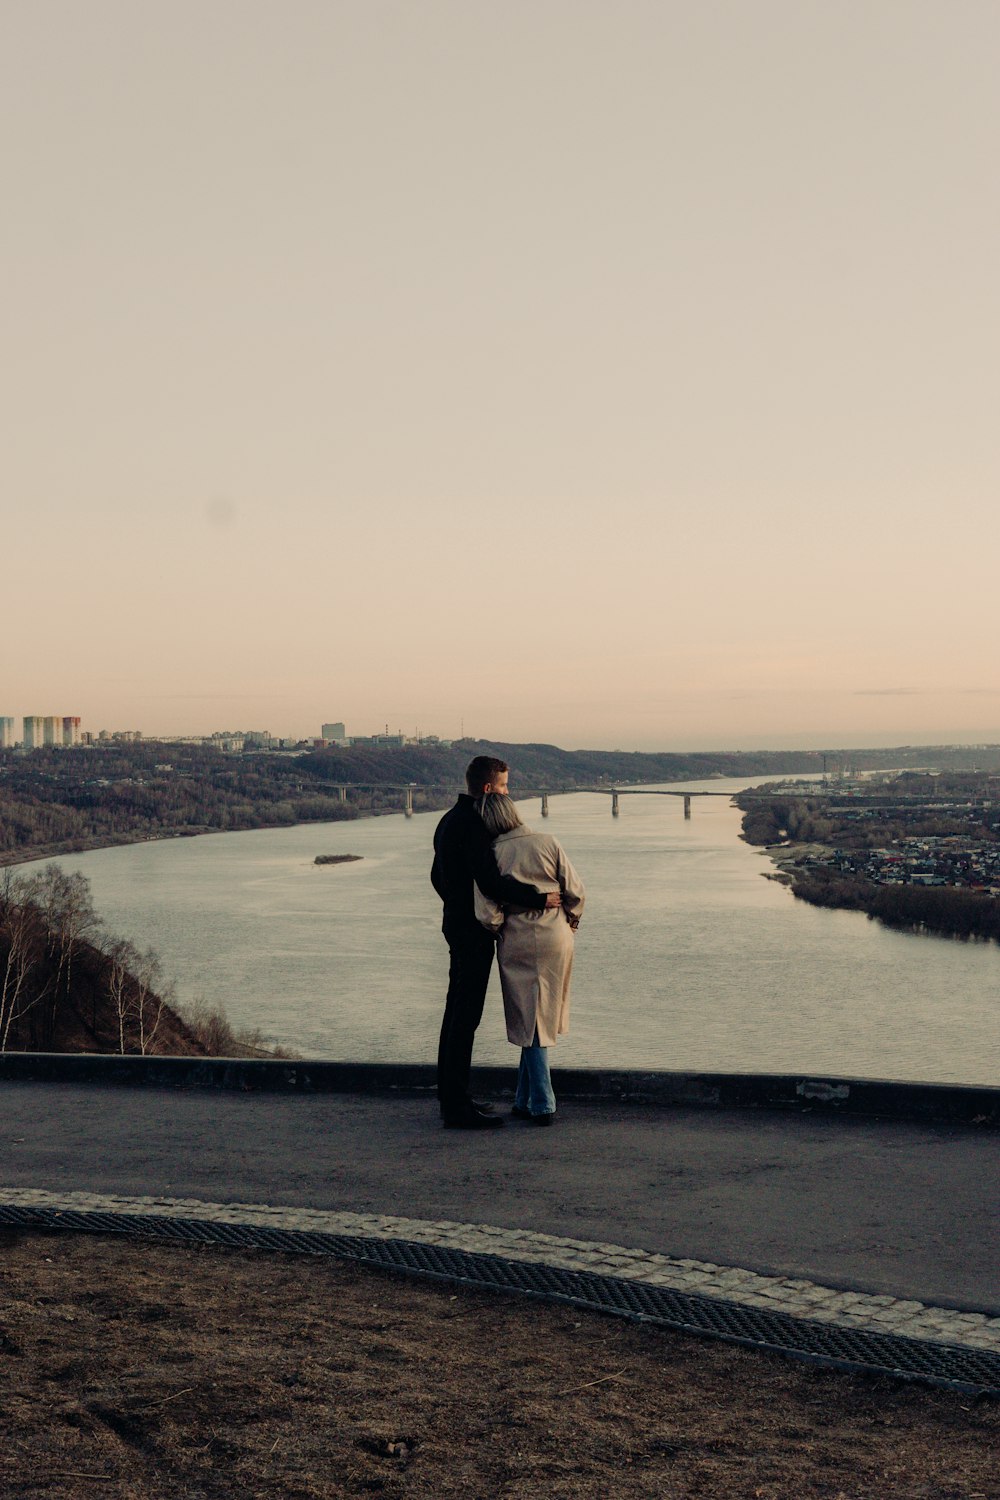 a man and a woman standing on a hill overlooking a body of water